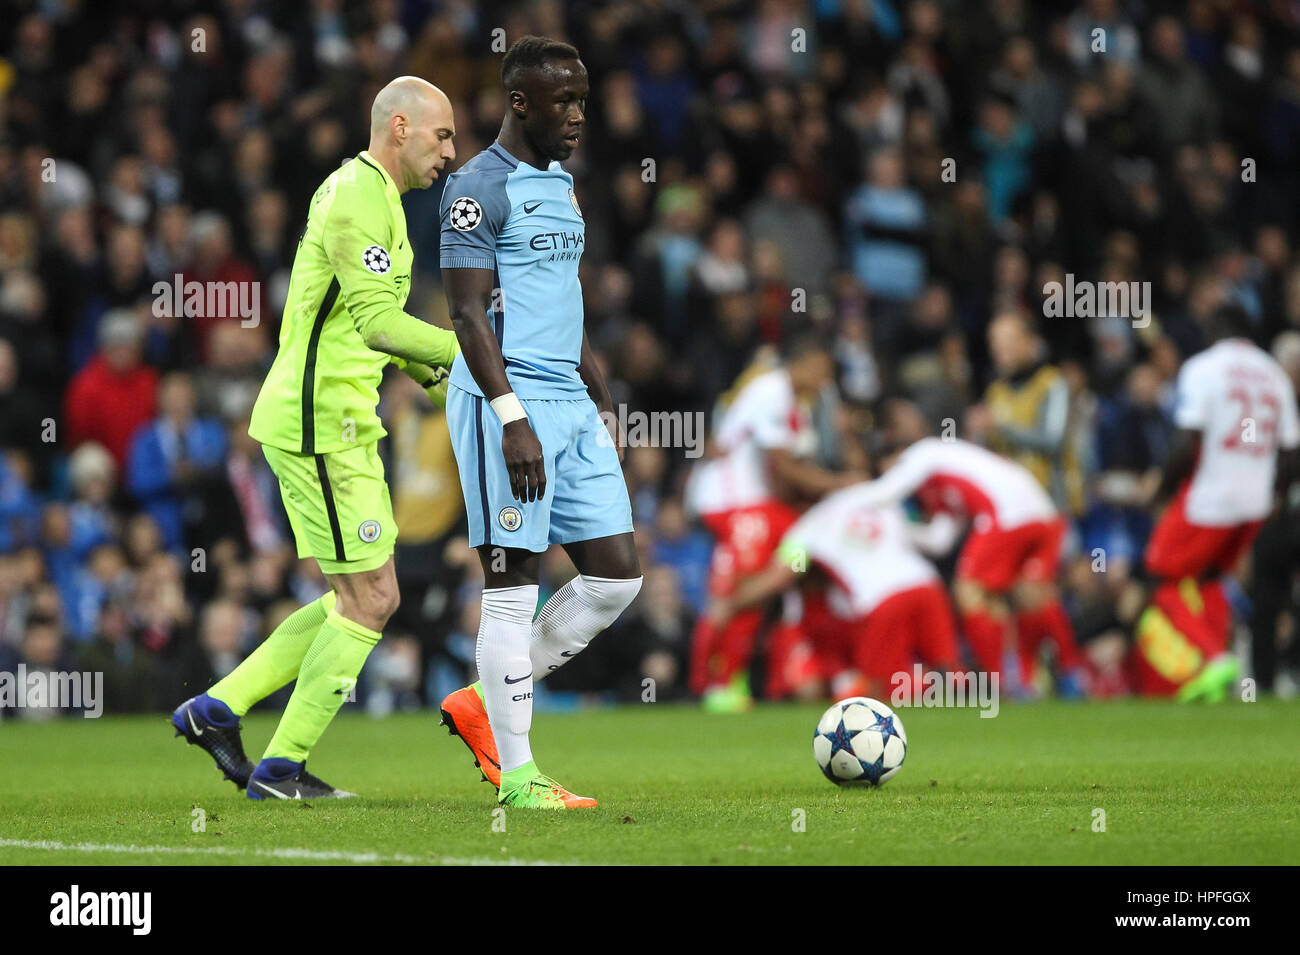 Manchester, UK. 21st Feb, 2017. Bacary Sagna of Manchester City and Claudio Bravo of Manchester City look dejected as Radamel Falcao of Monaco celebrates after scoring his side's third goal during the UEFA Champions League Round of 16 first leg match between Manchester City and AS Monaco at the Etihad Stadium on February 21st 2017 in Manchester, England. Credit: PHC Images/Alamy Live News Stock Photo